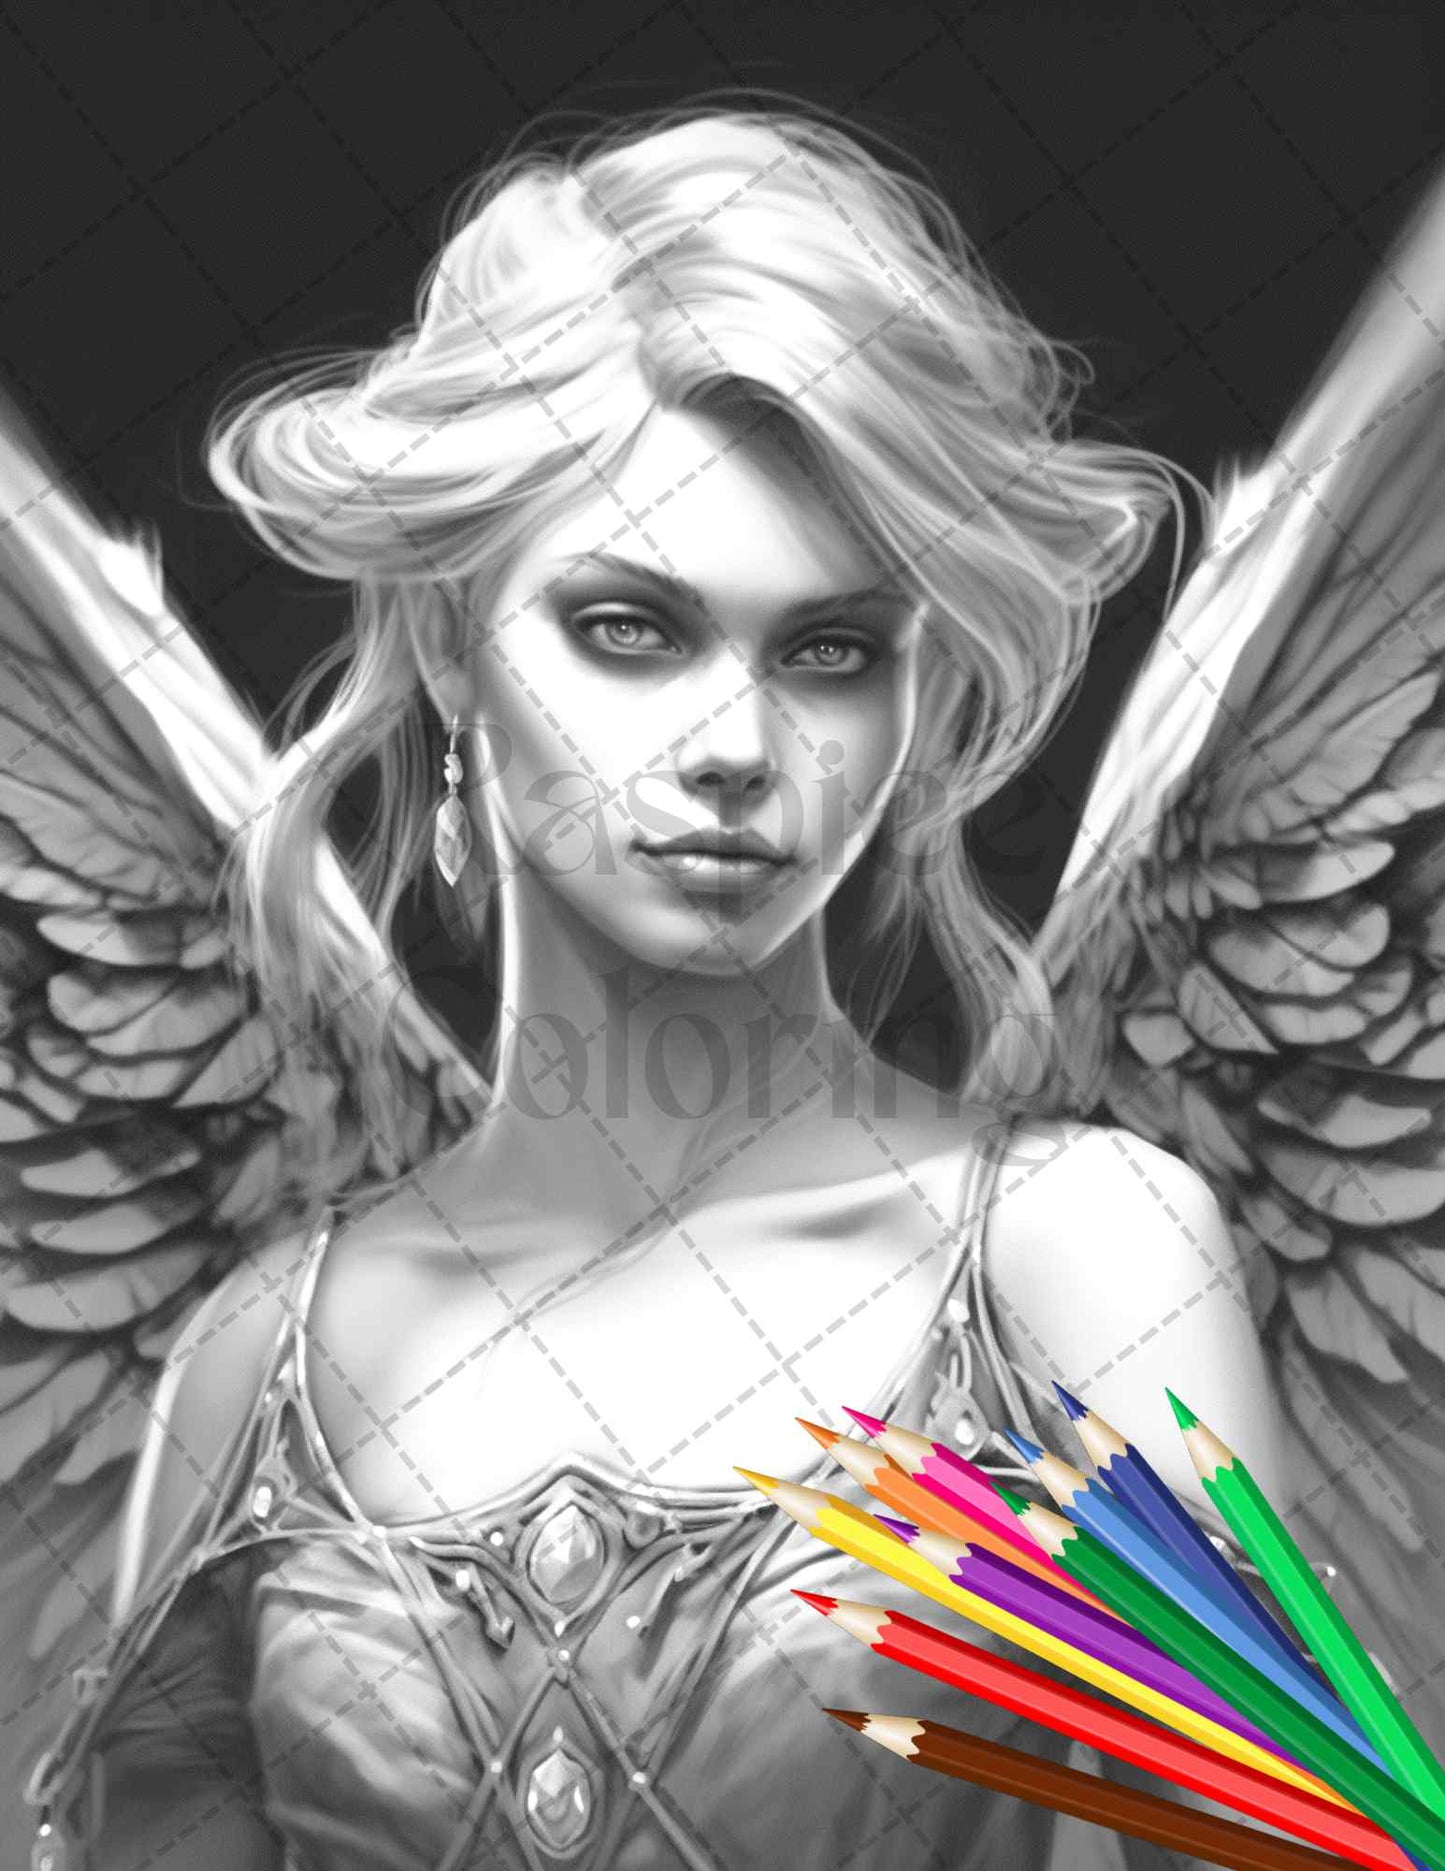 dark fairy grayscale coloring page for adults, printable fantasy coloring page with beautiful fairy, instant download black and white fairy coloring art